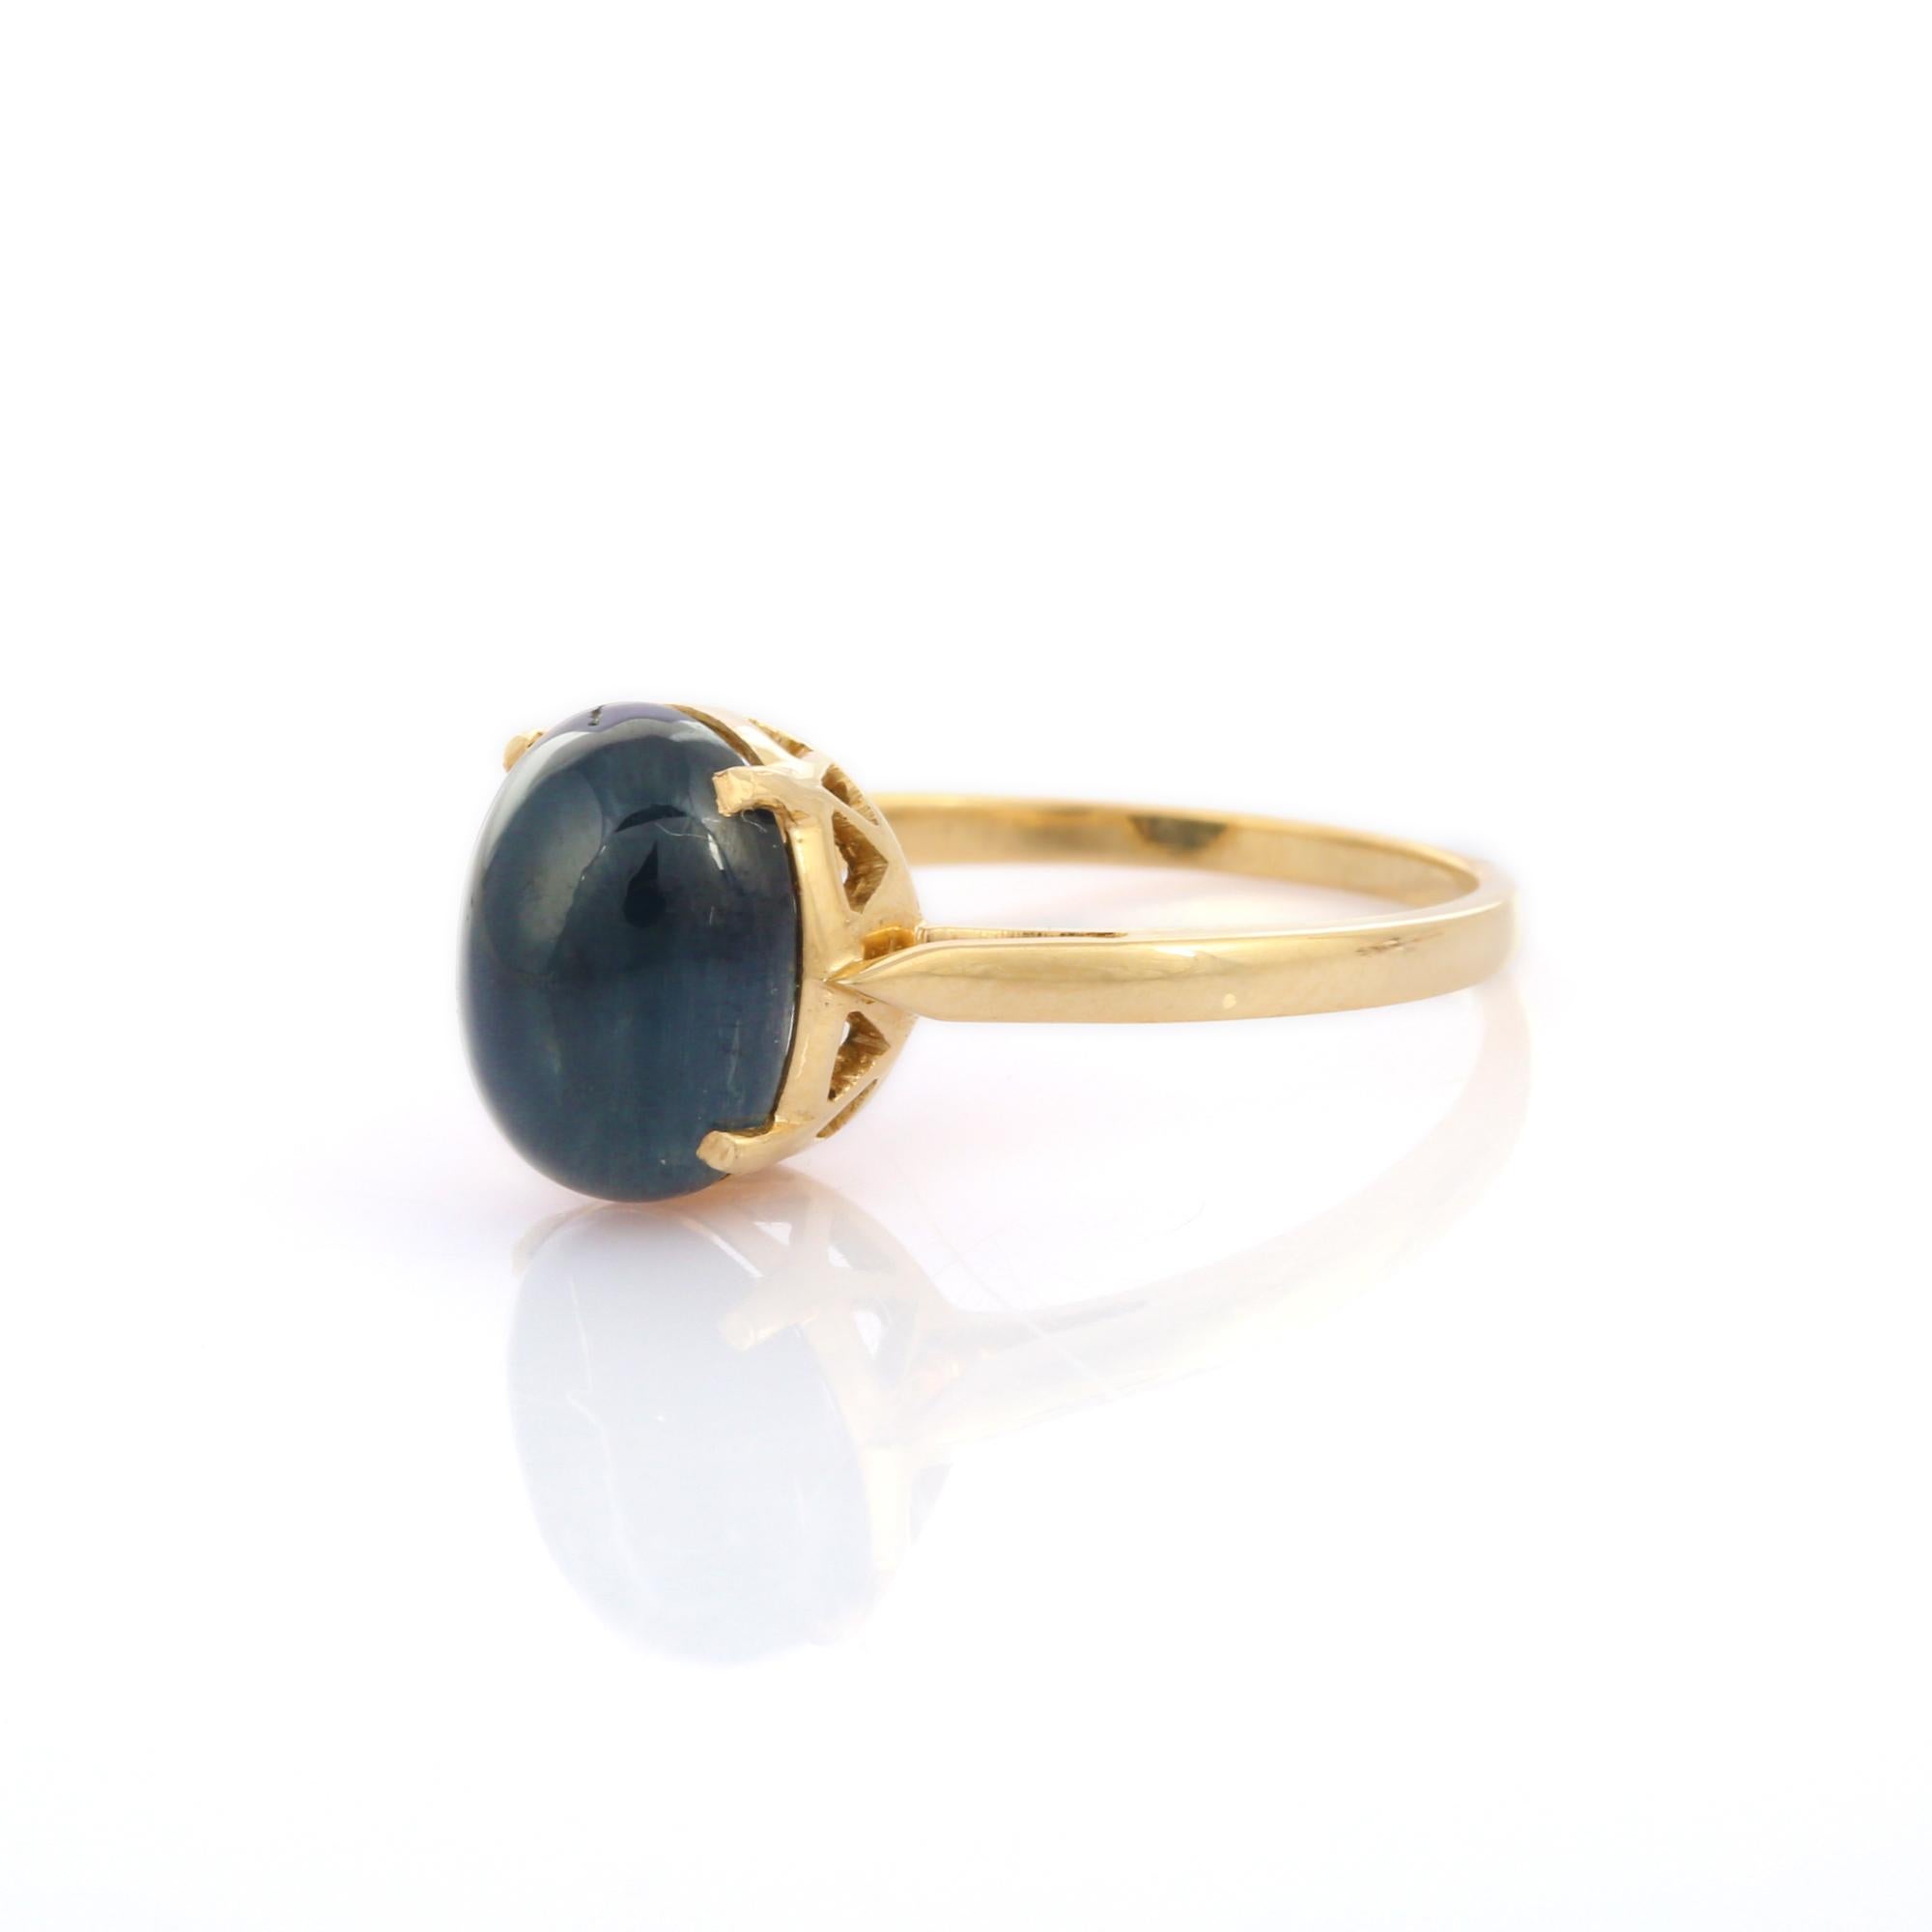 For Sale:  Anglo Indian Style 14K Yellow Gold Blue Sapphire Gemstone Ring 3